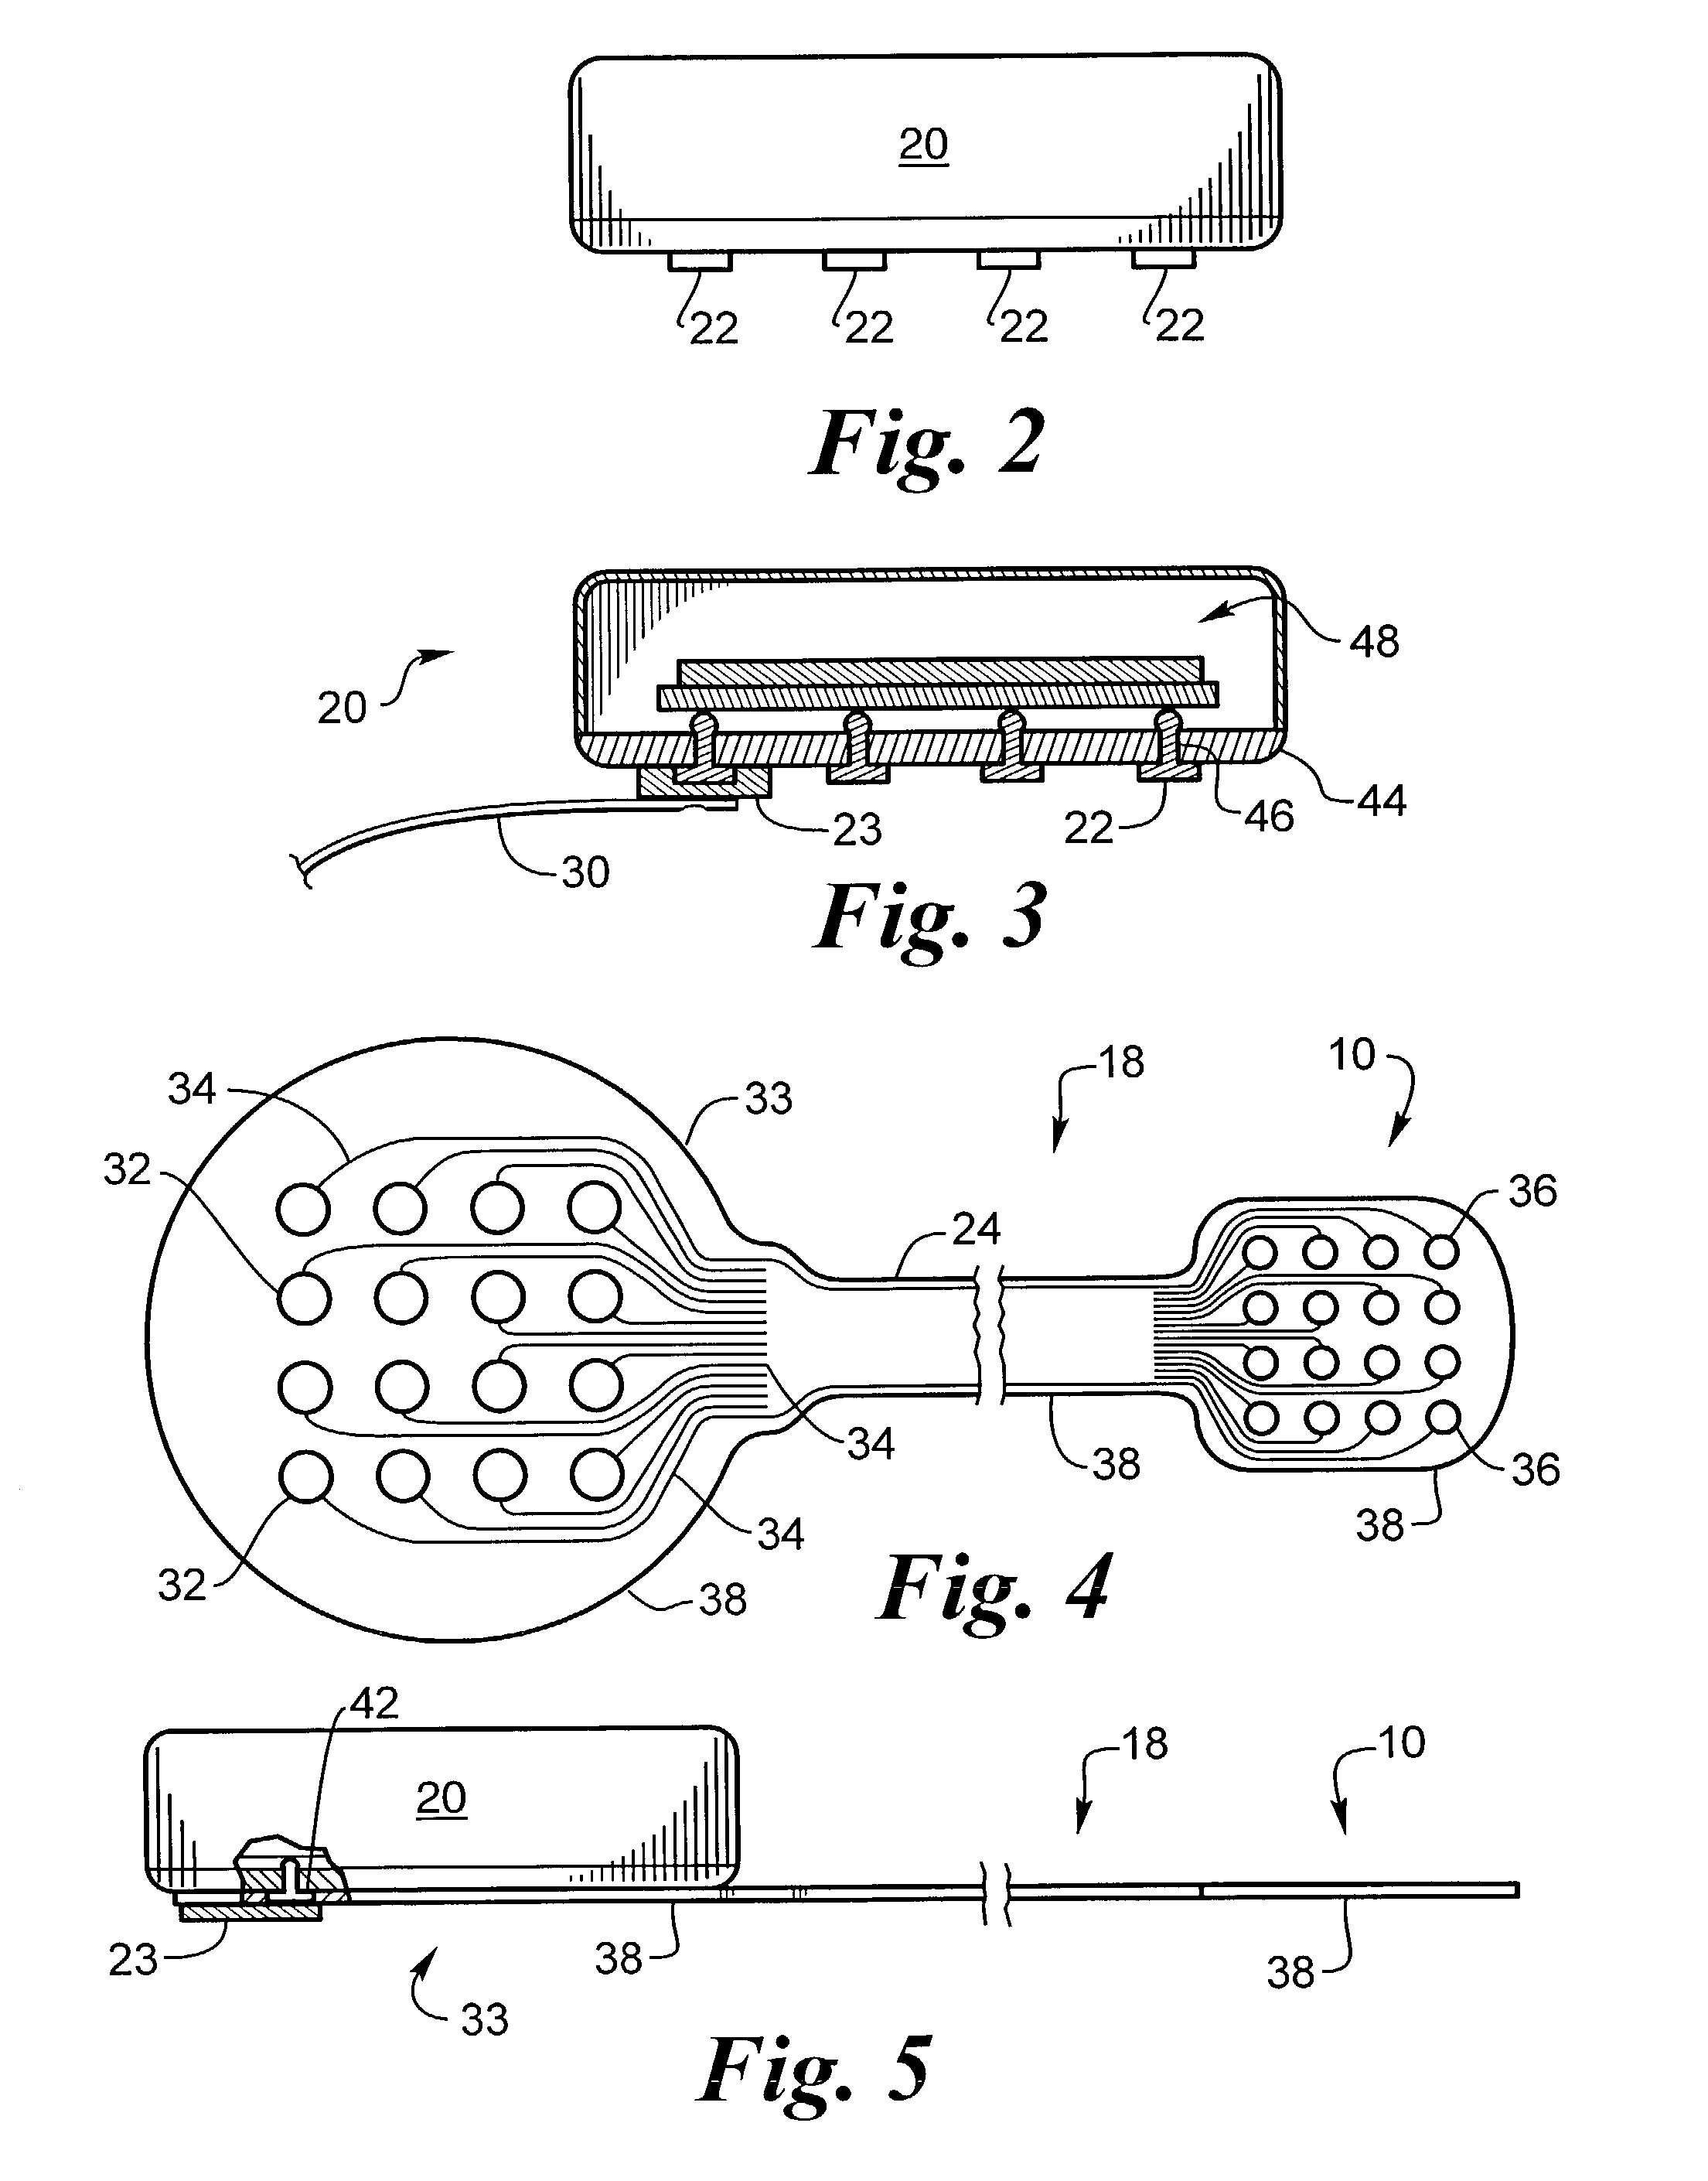 Biocompatible bonding method and electronics package suitable for implantation